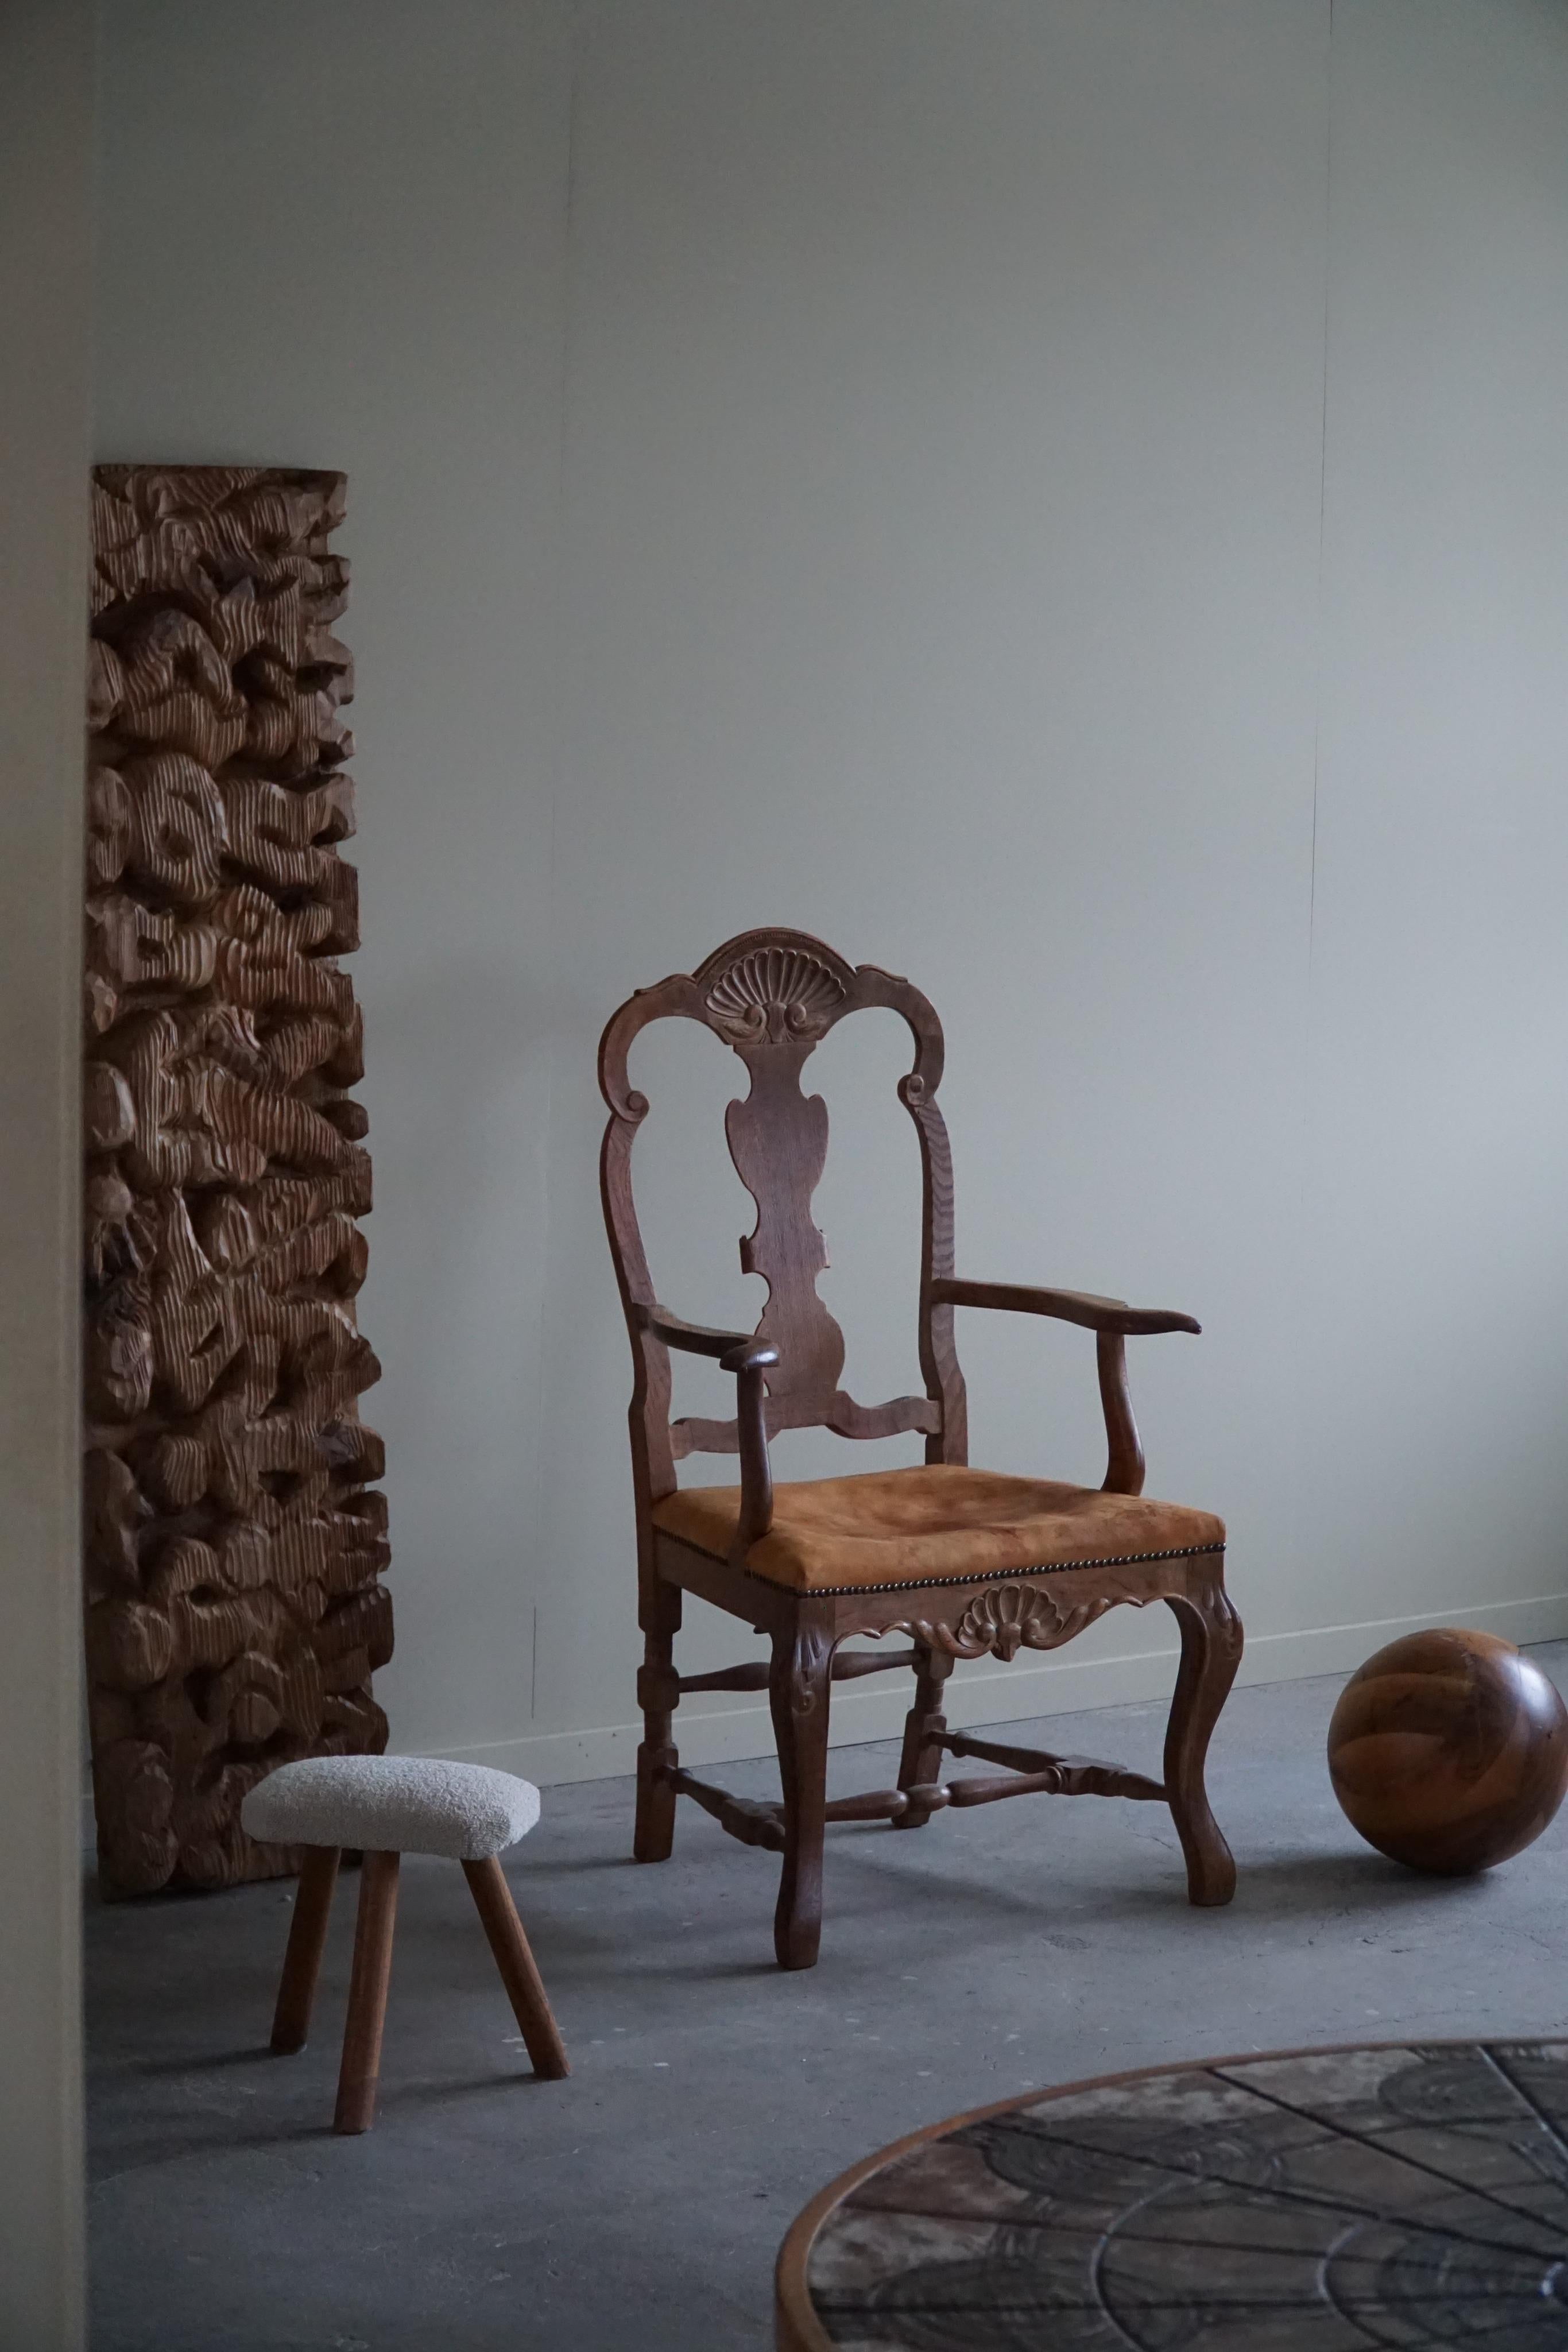 A sculptural armchair in oak and leather seat. Made by a Danish Cabinetmaker in the 1940s. A decorative figure for the modern interior. This armchair / deskchair have a really strong impression that pairs well with many types of interior styles. A